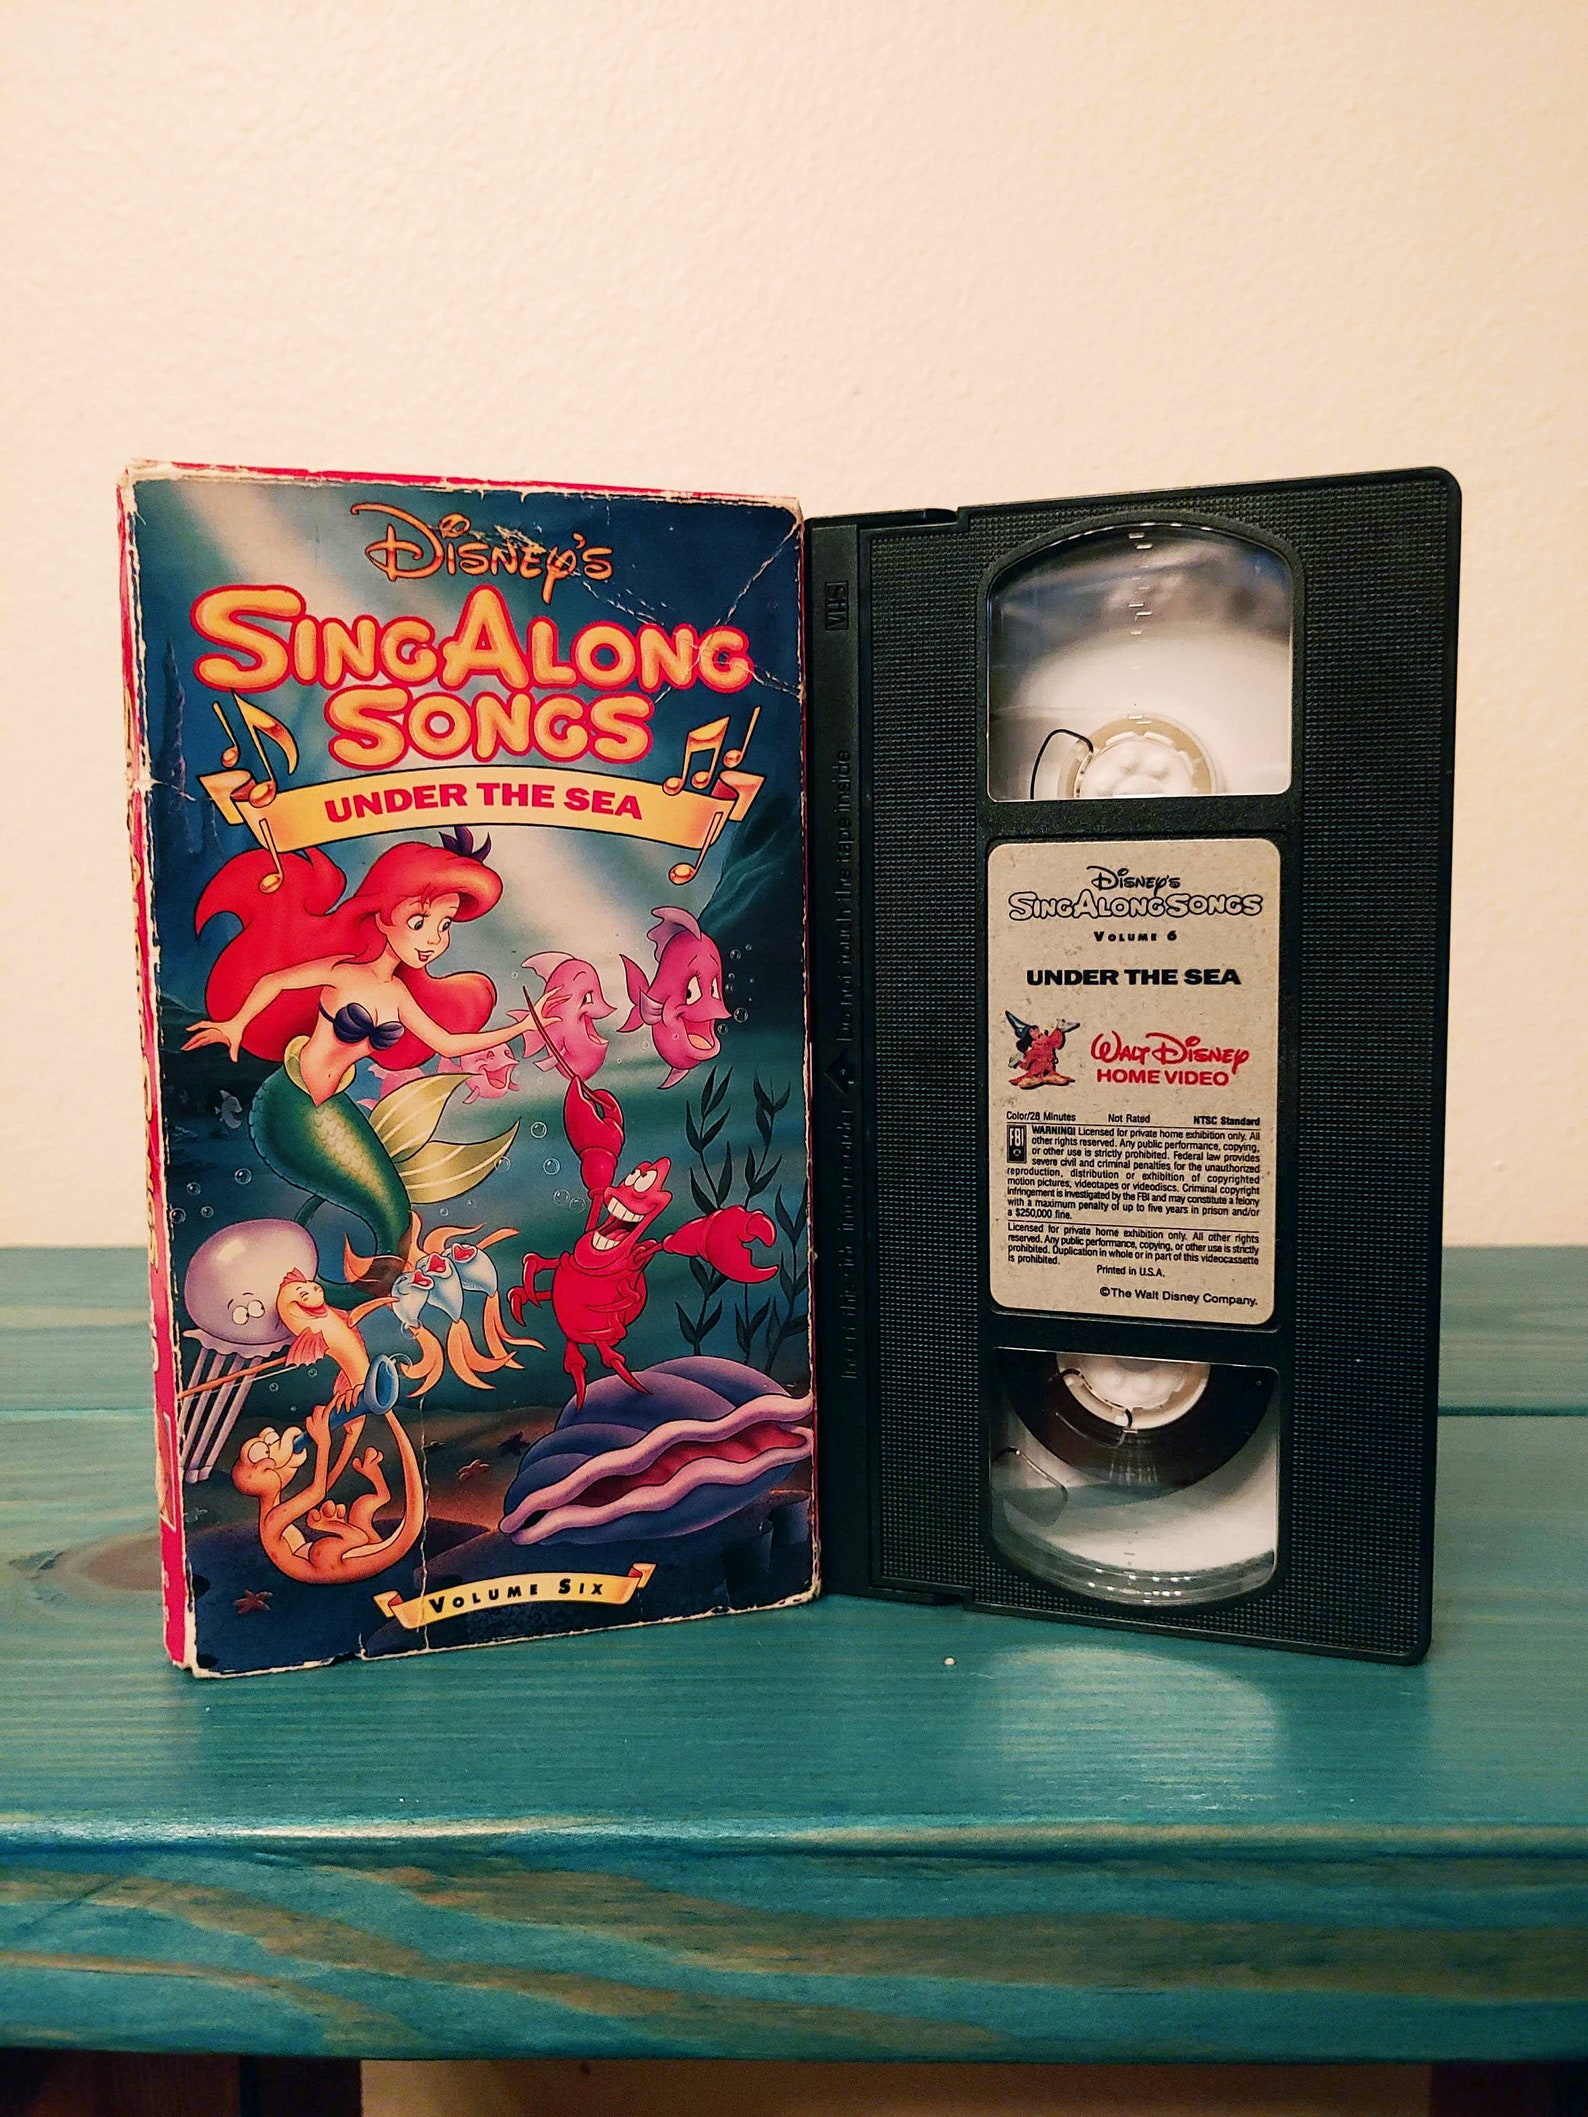 Disney's Sing Along Songs: Under the Sea 1990 VHS Tape - Etsy